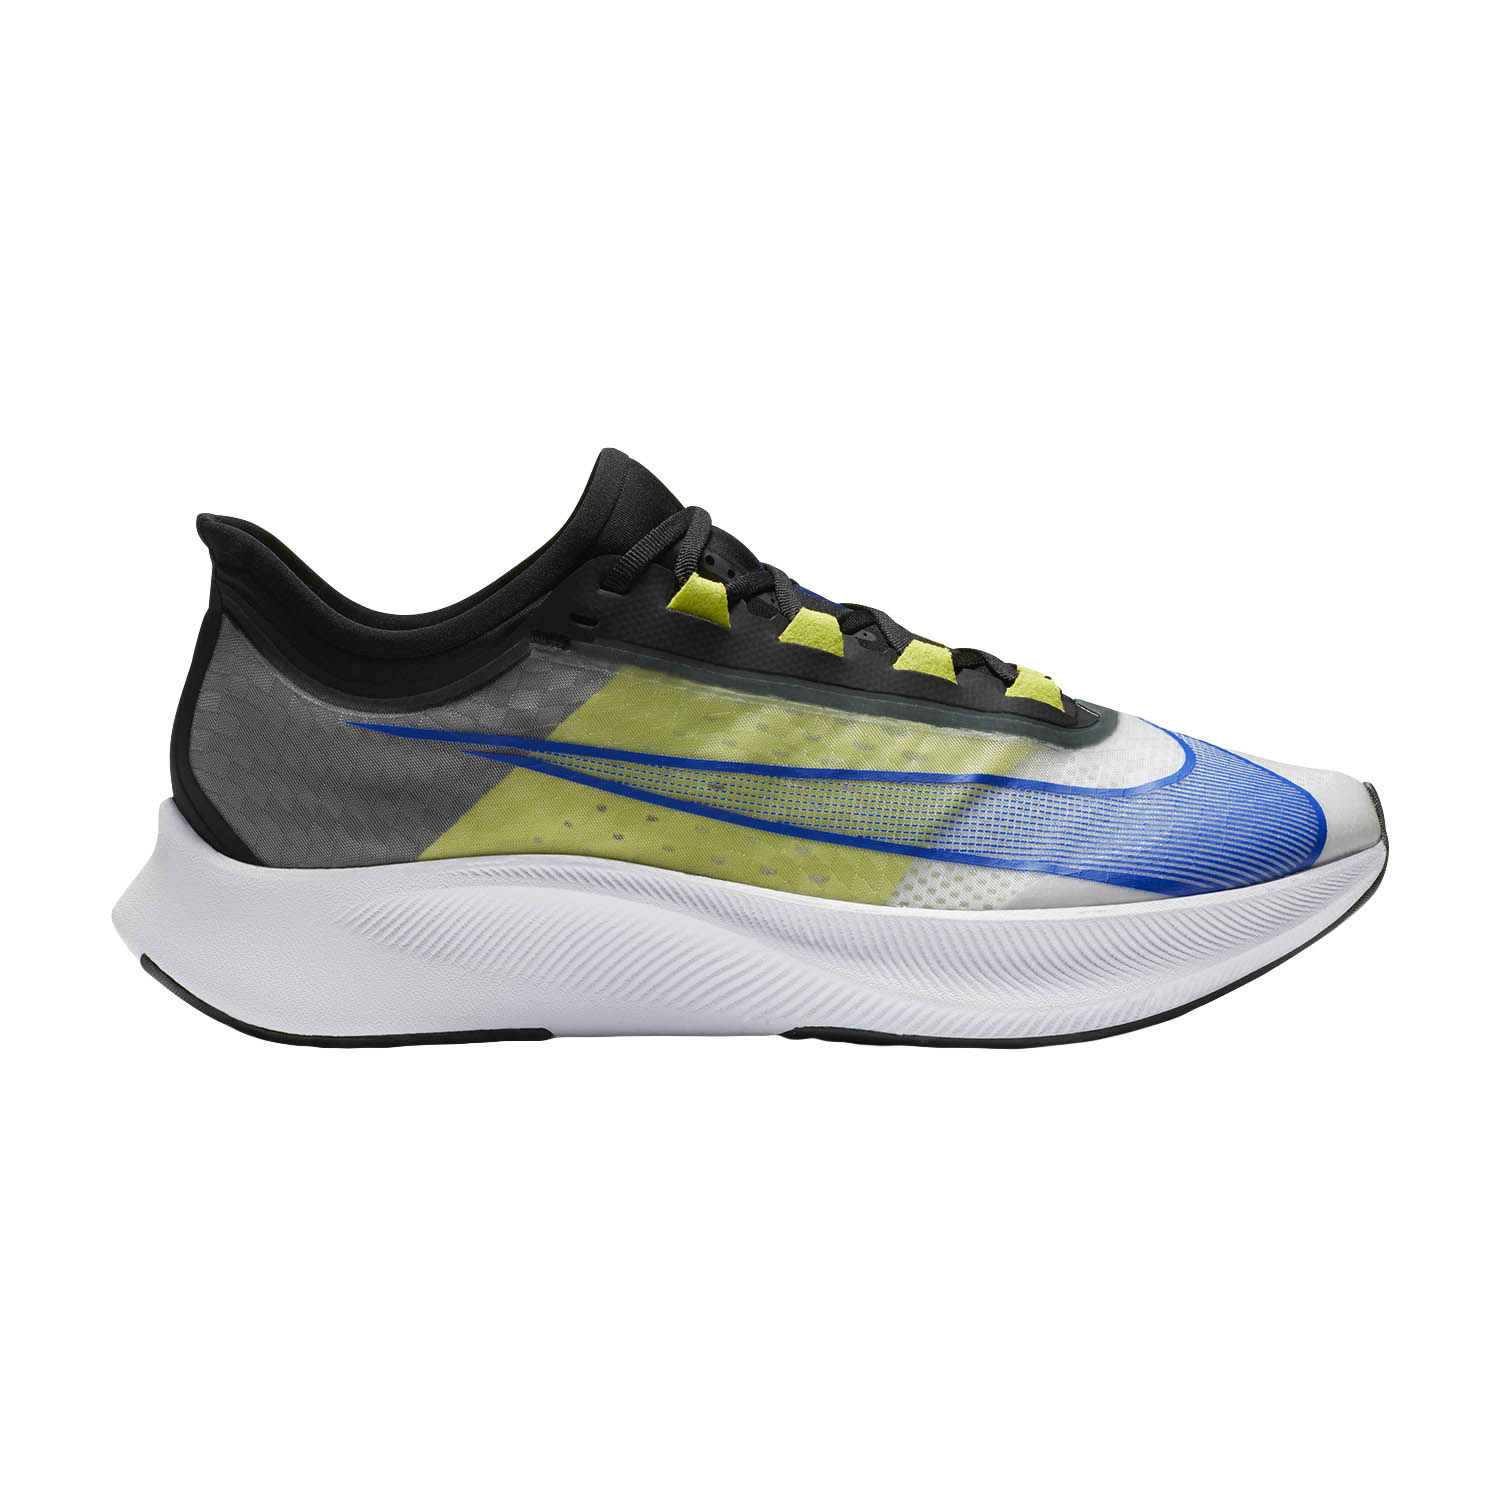 Nike Zoom Fly 3 Men's Running Shoes 